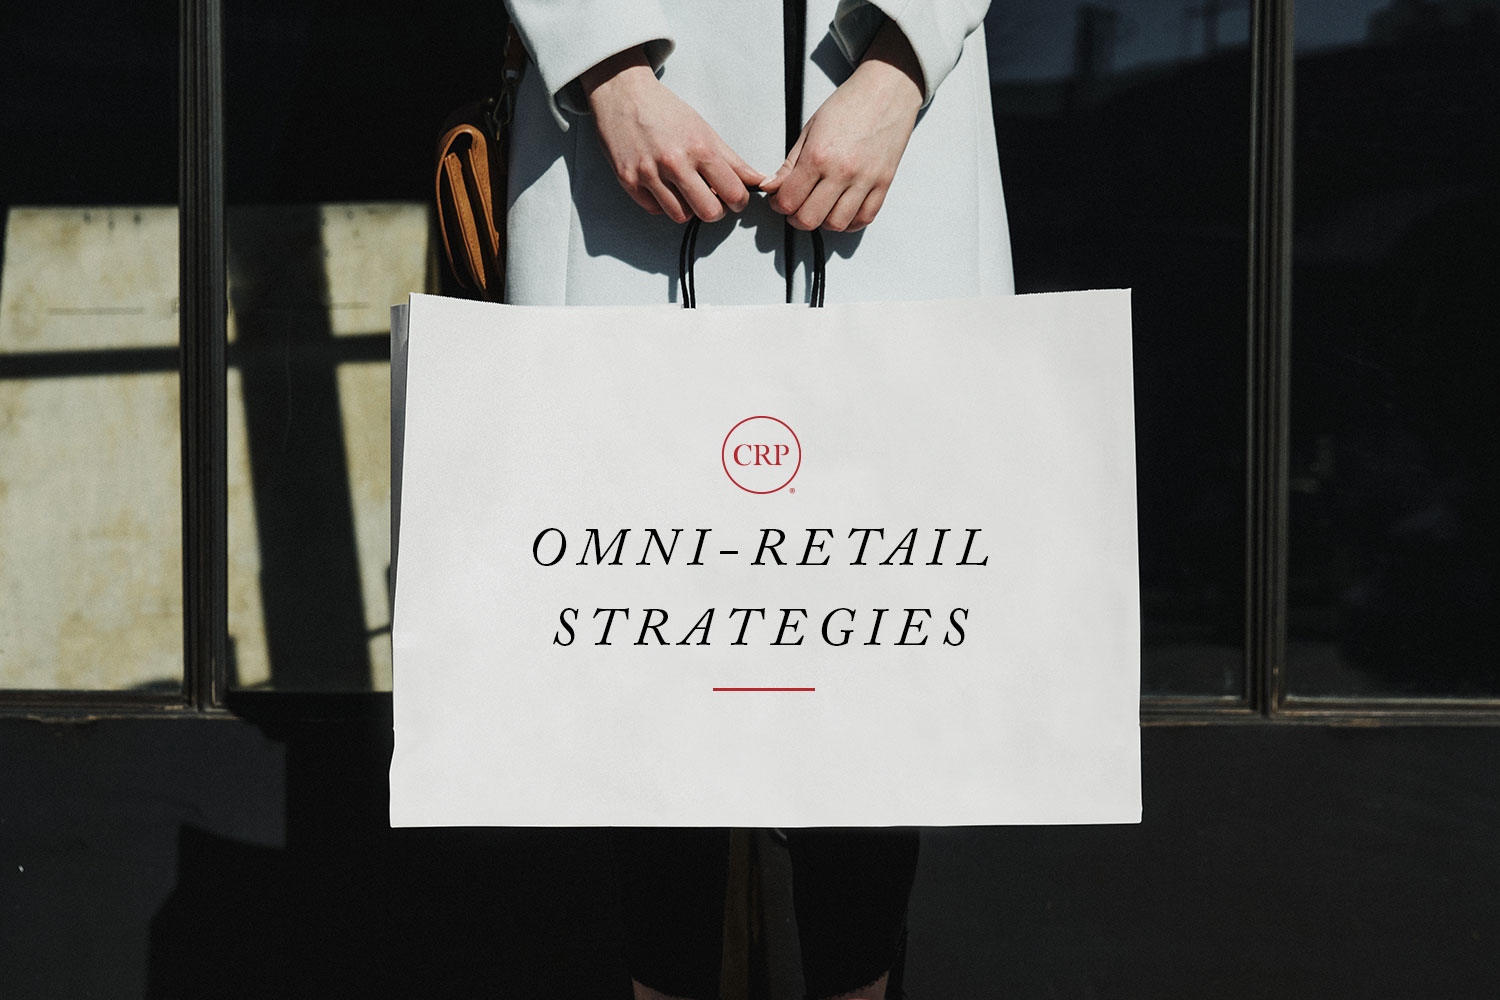 Snap of Omni-Retail Strategies hinting at retail-focused business plans and practical solutions.